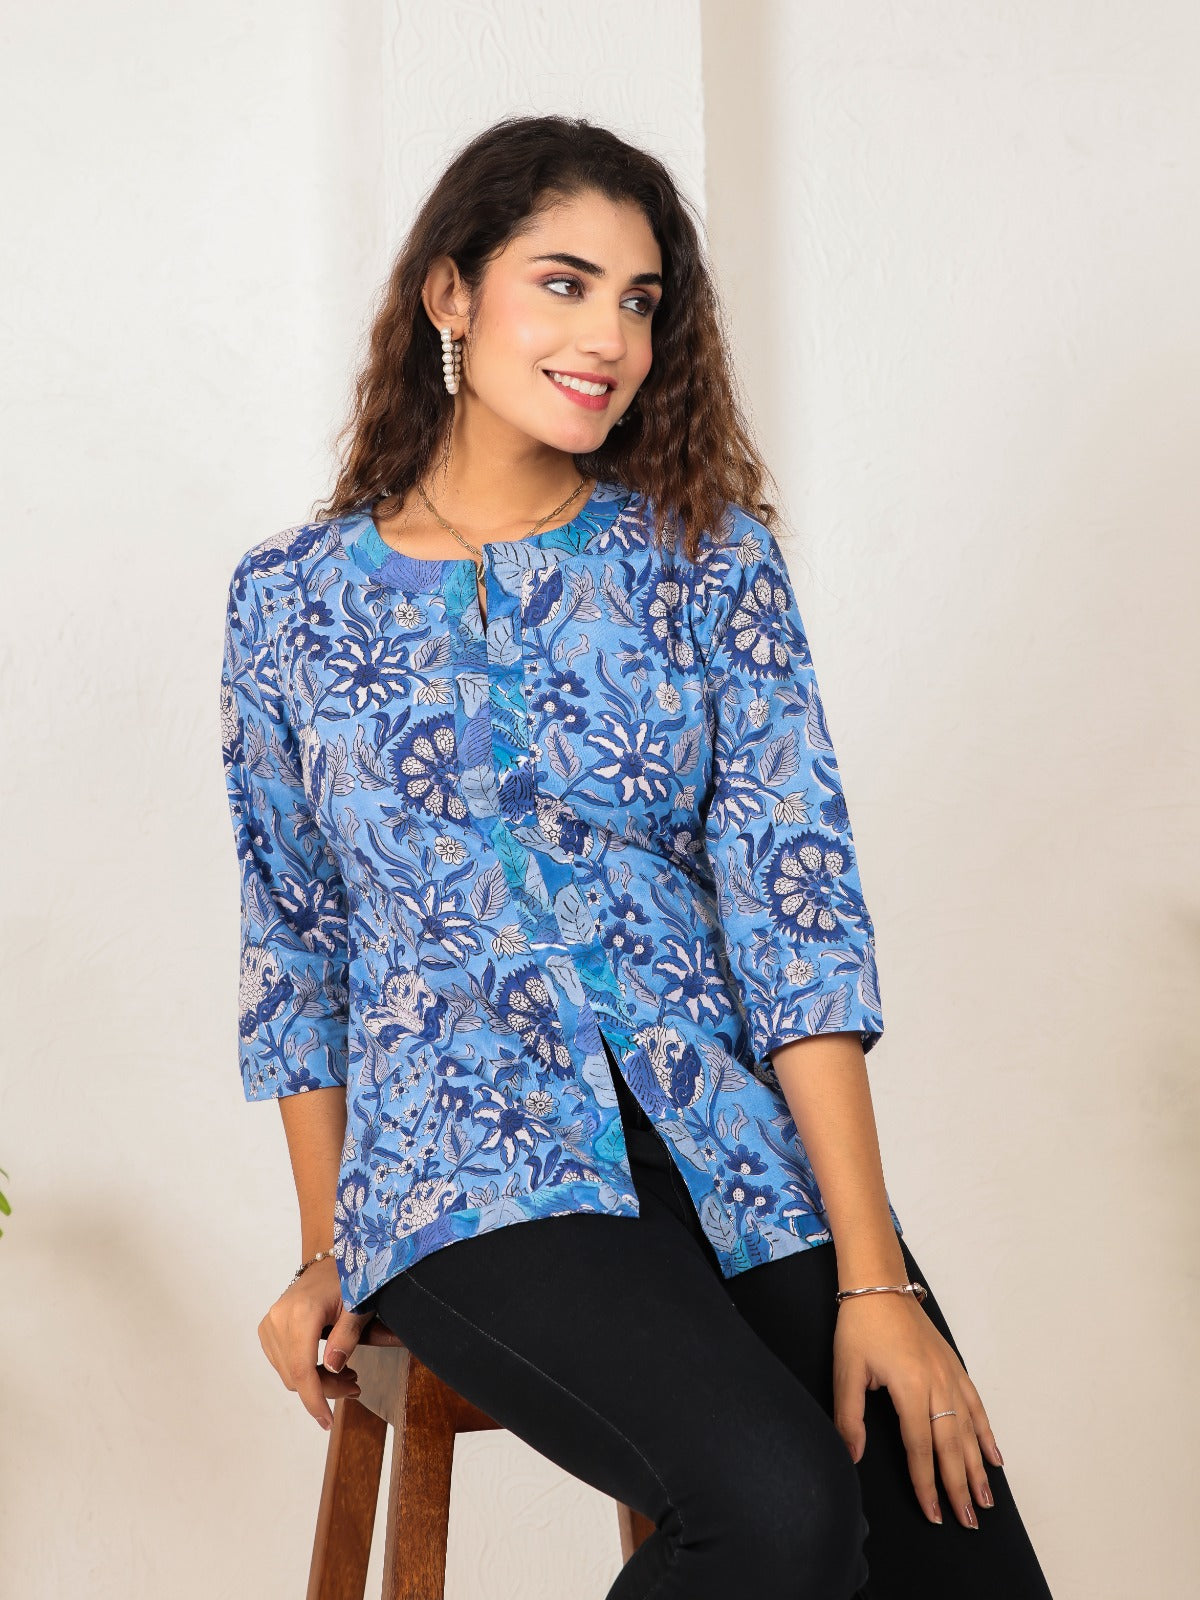 Southloom Jaipur Cotton Blue Floral Hand Block Printed Top